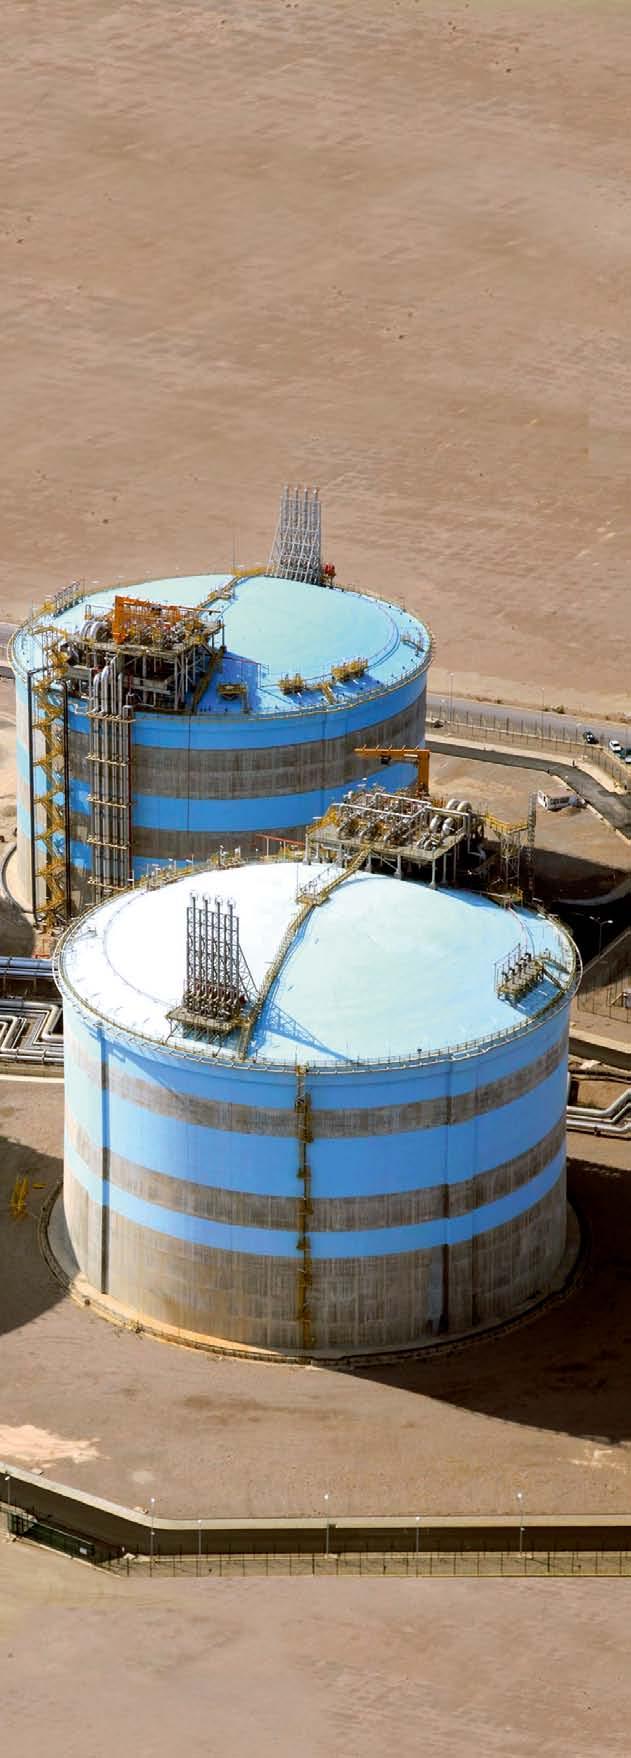 1 SAFETY PHILOSOPHY Our safety philosophy has led us to develop and continually enhance the design and construction of such storage tank systems taking into account all aspects of safety.